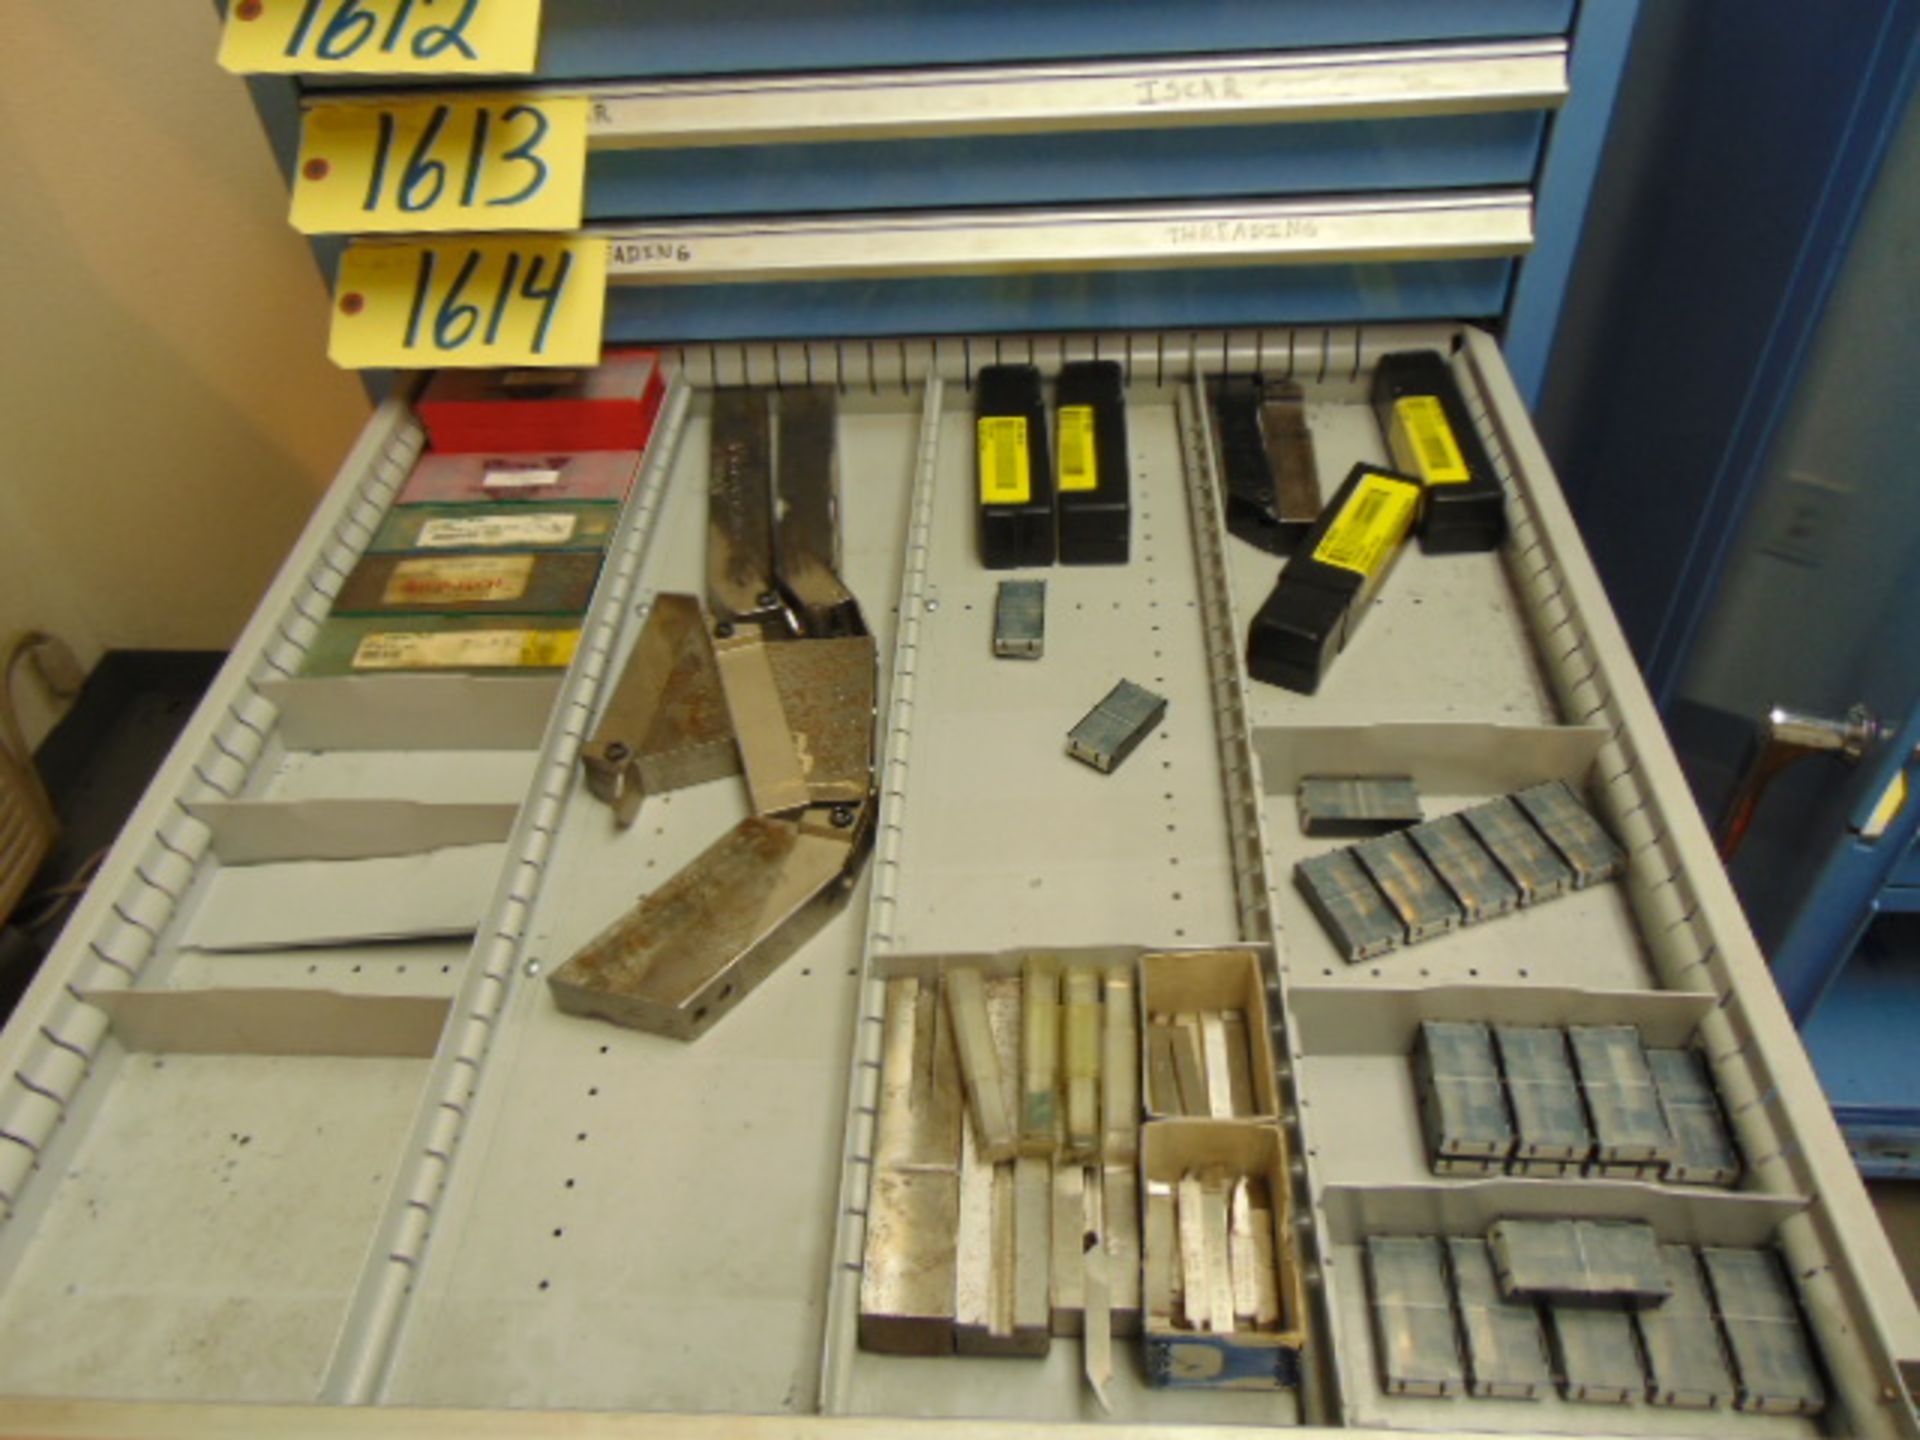 LOT CONTENTS OF DRAWER: assorted insert toolholders